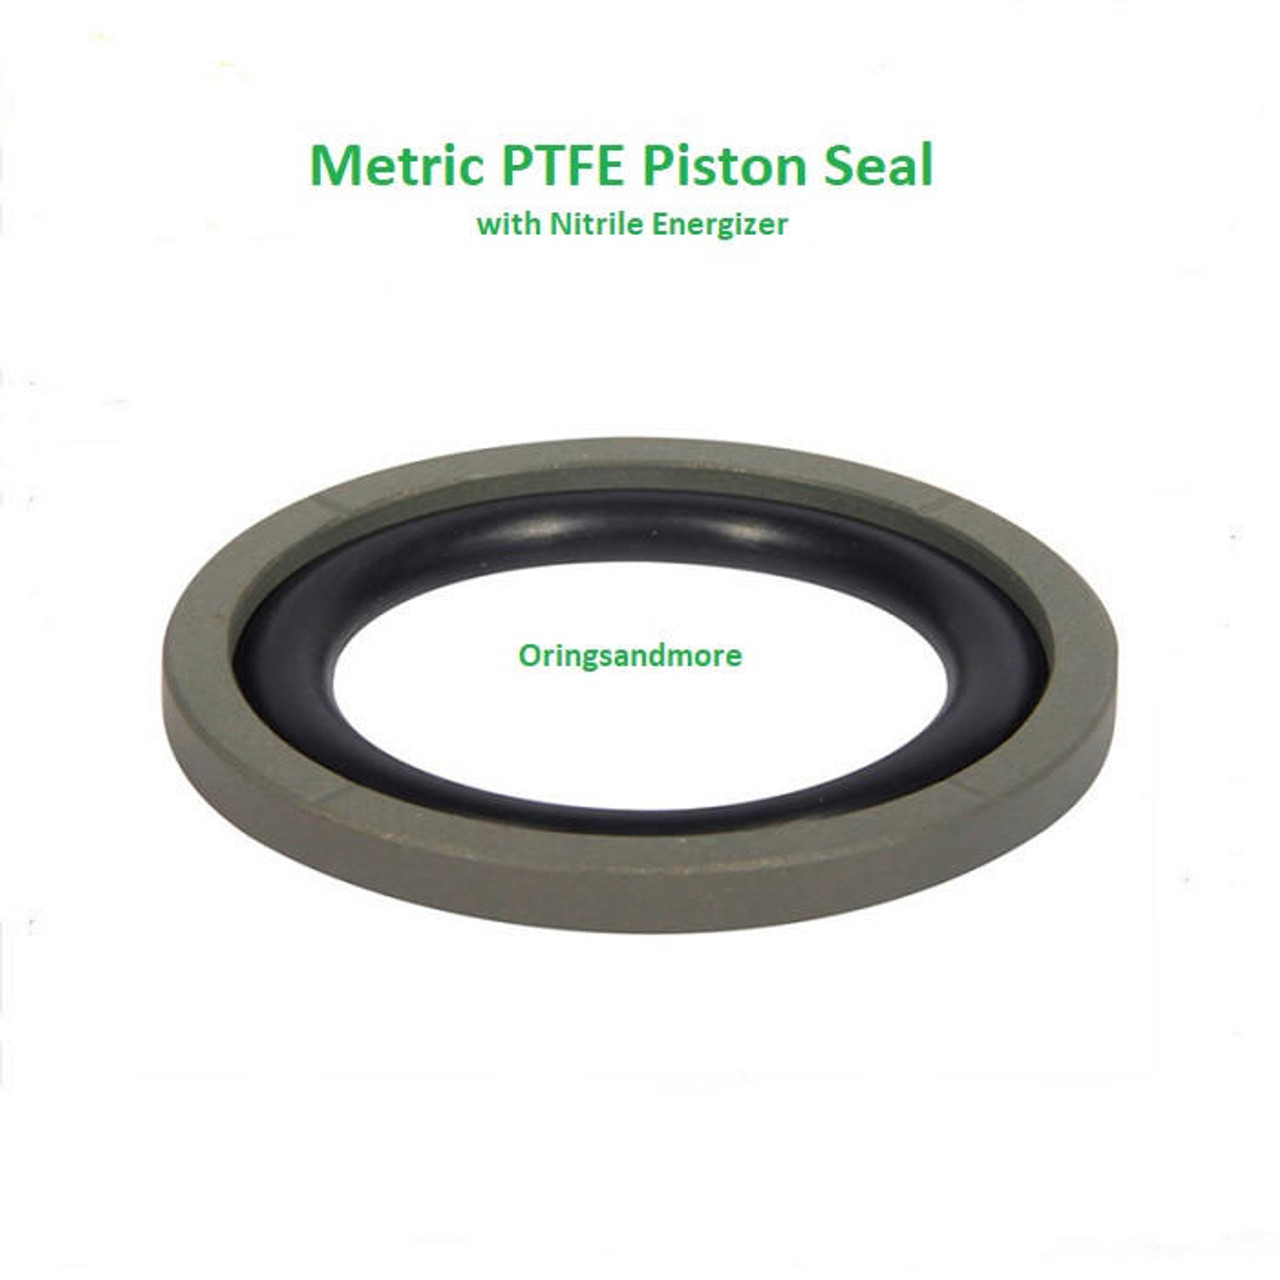 PTFE Piston Seal 100mm OD x 84.8mm ID x 6.4mm   Price for 1 pc